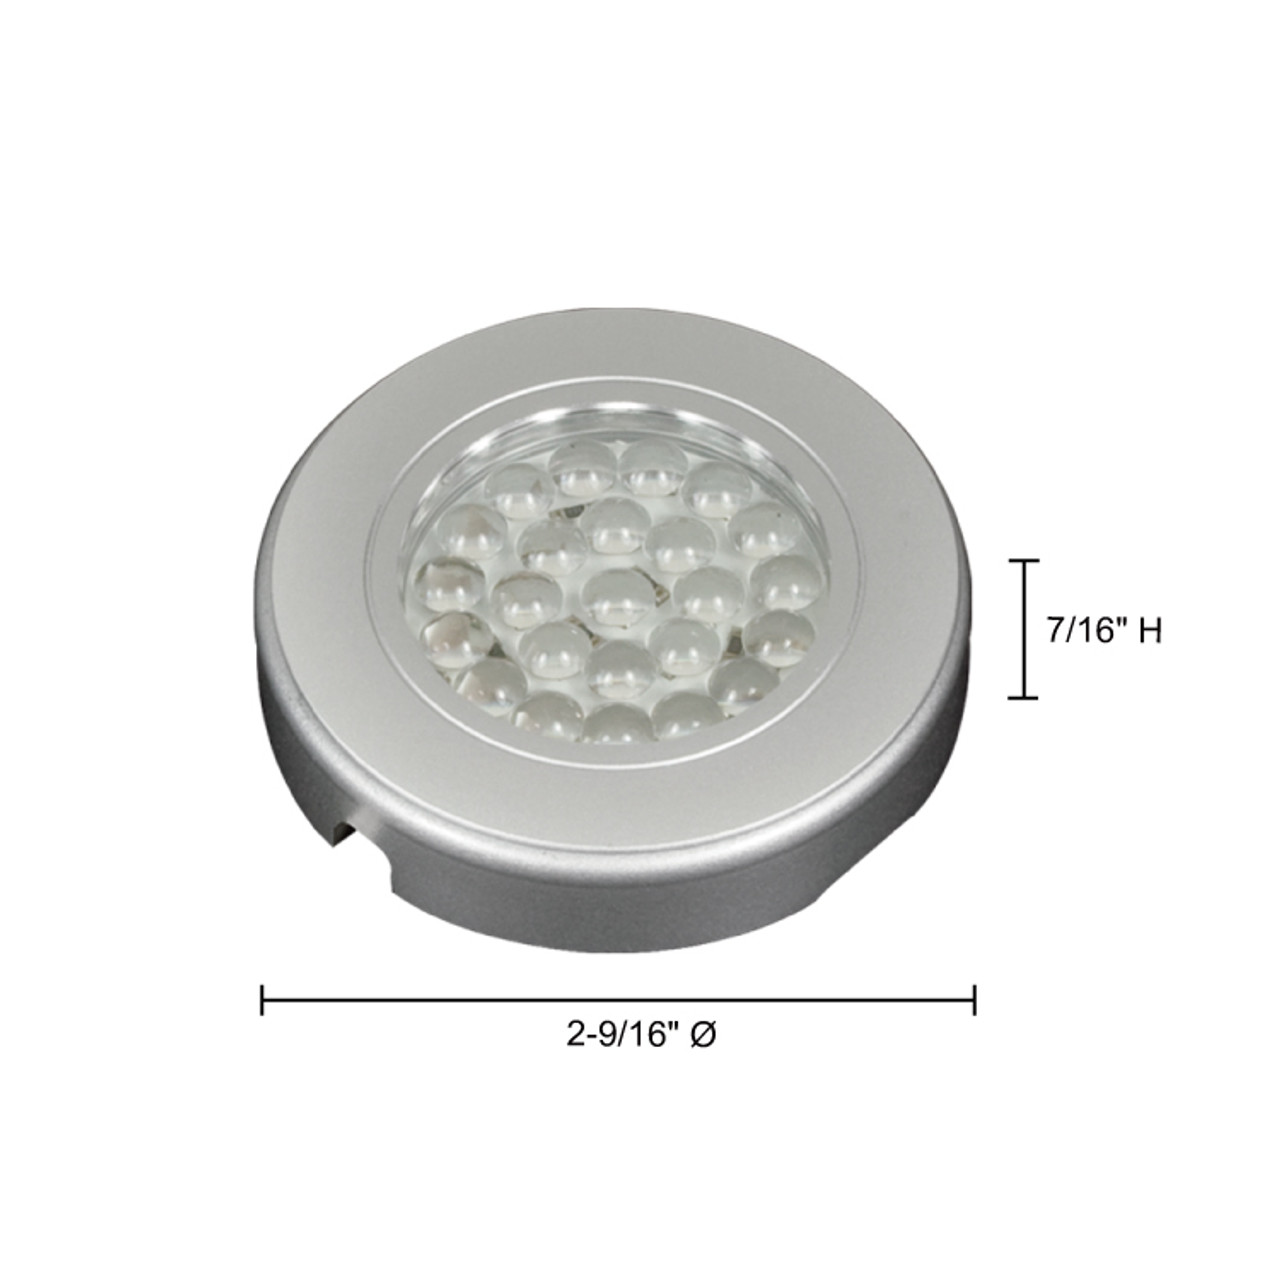 JESCO Lighting SD123CV4540-S 1.65W LED Orionis Recessed or Surface Mount, 4500K, Silver